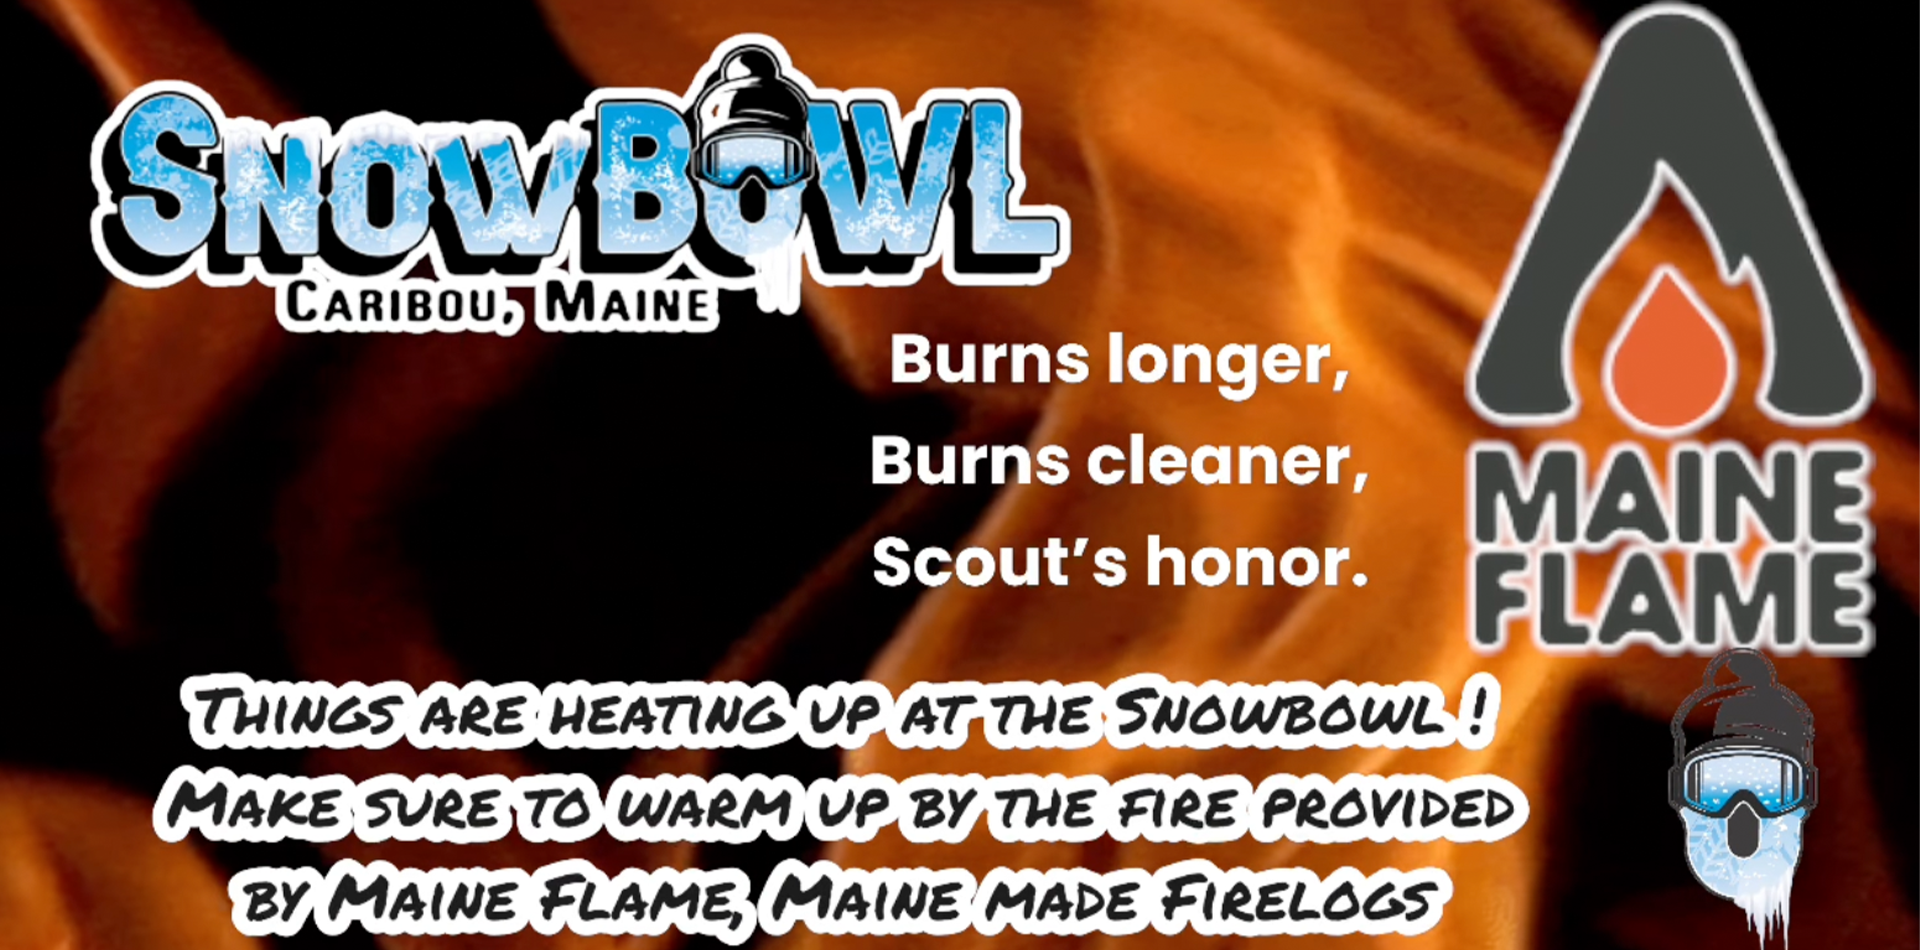 Maine Flame.png